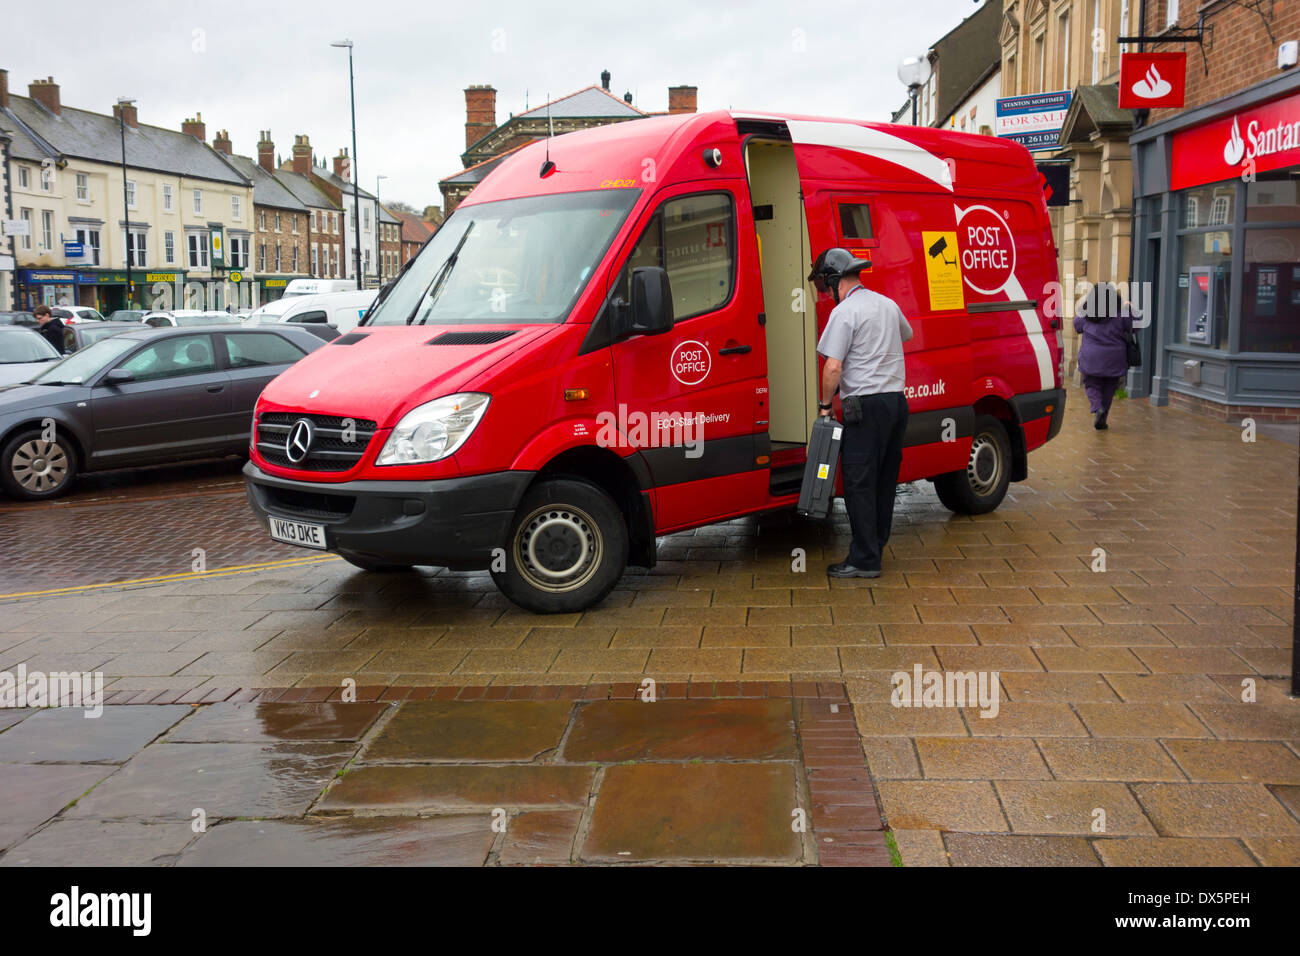 A Post Office van with driver wearing a 